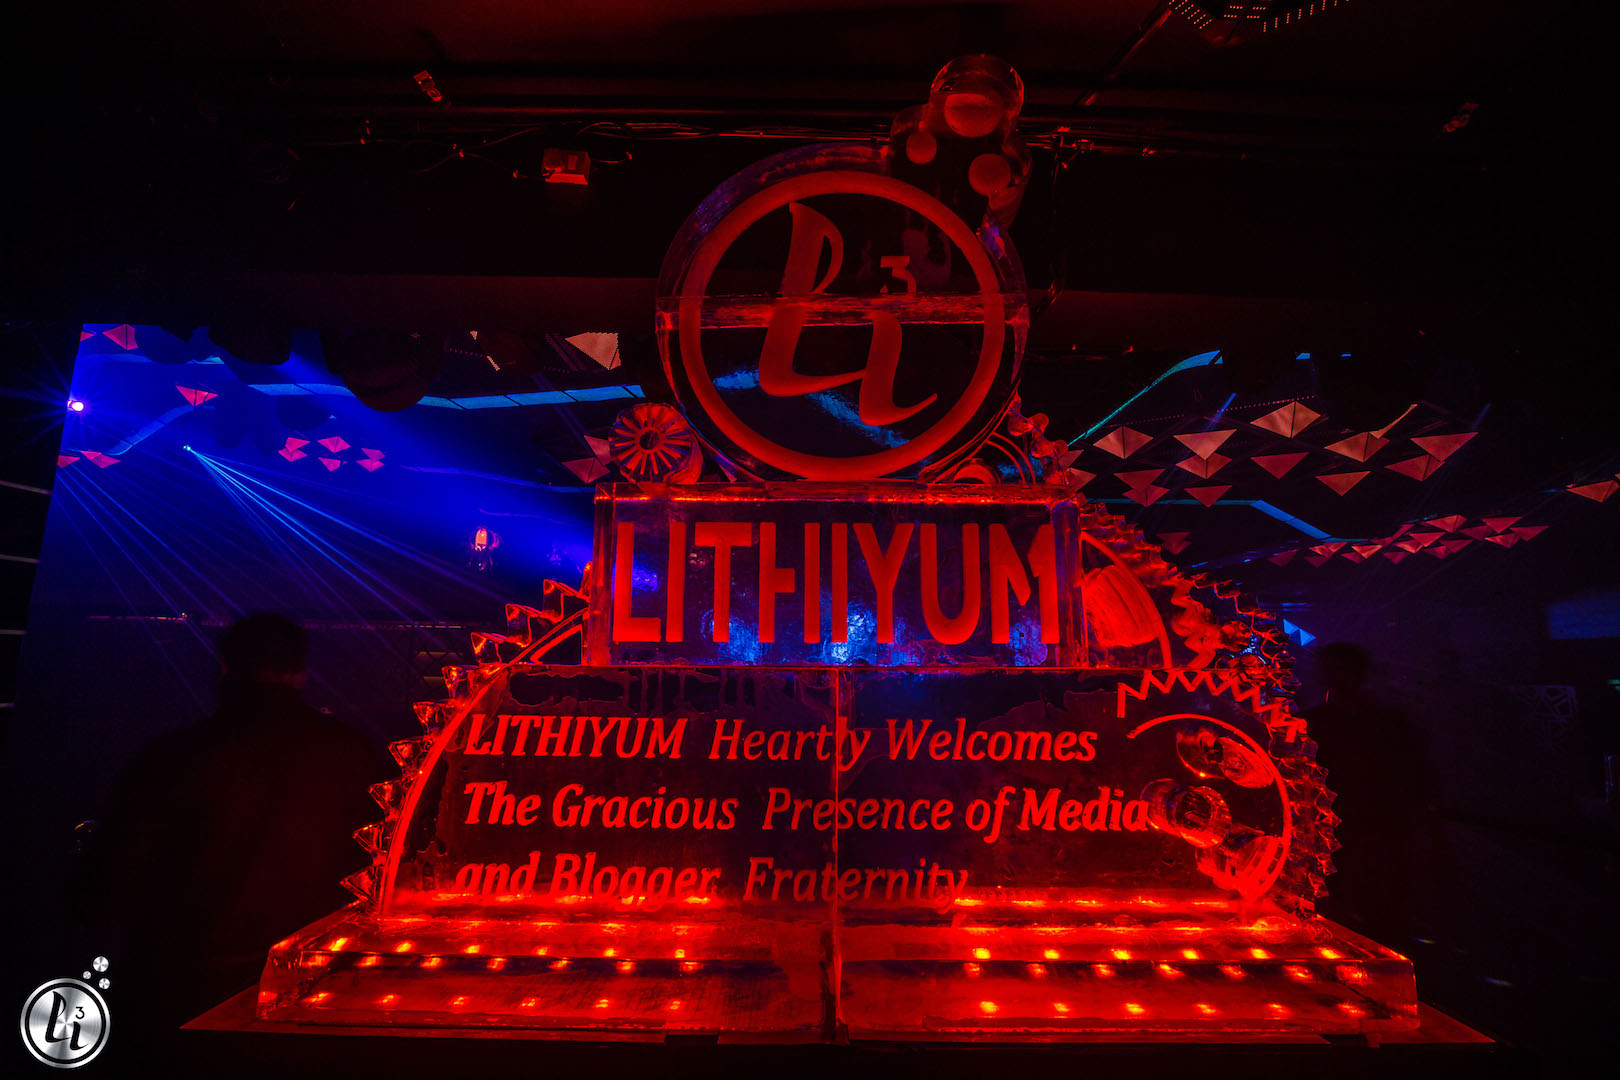 Lithiyum Launches with a Big Bang!